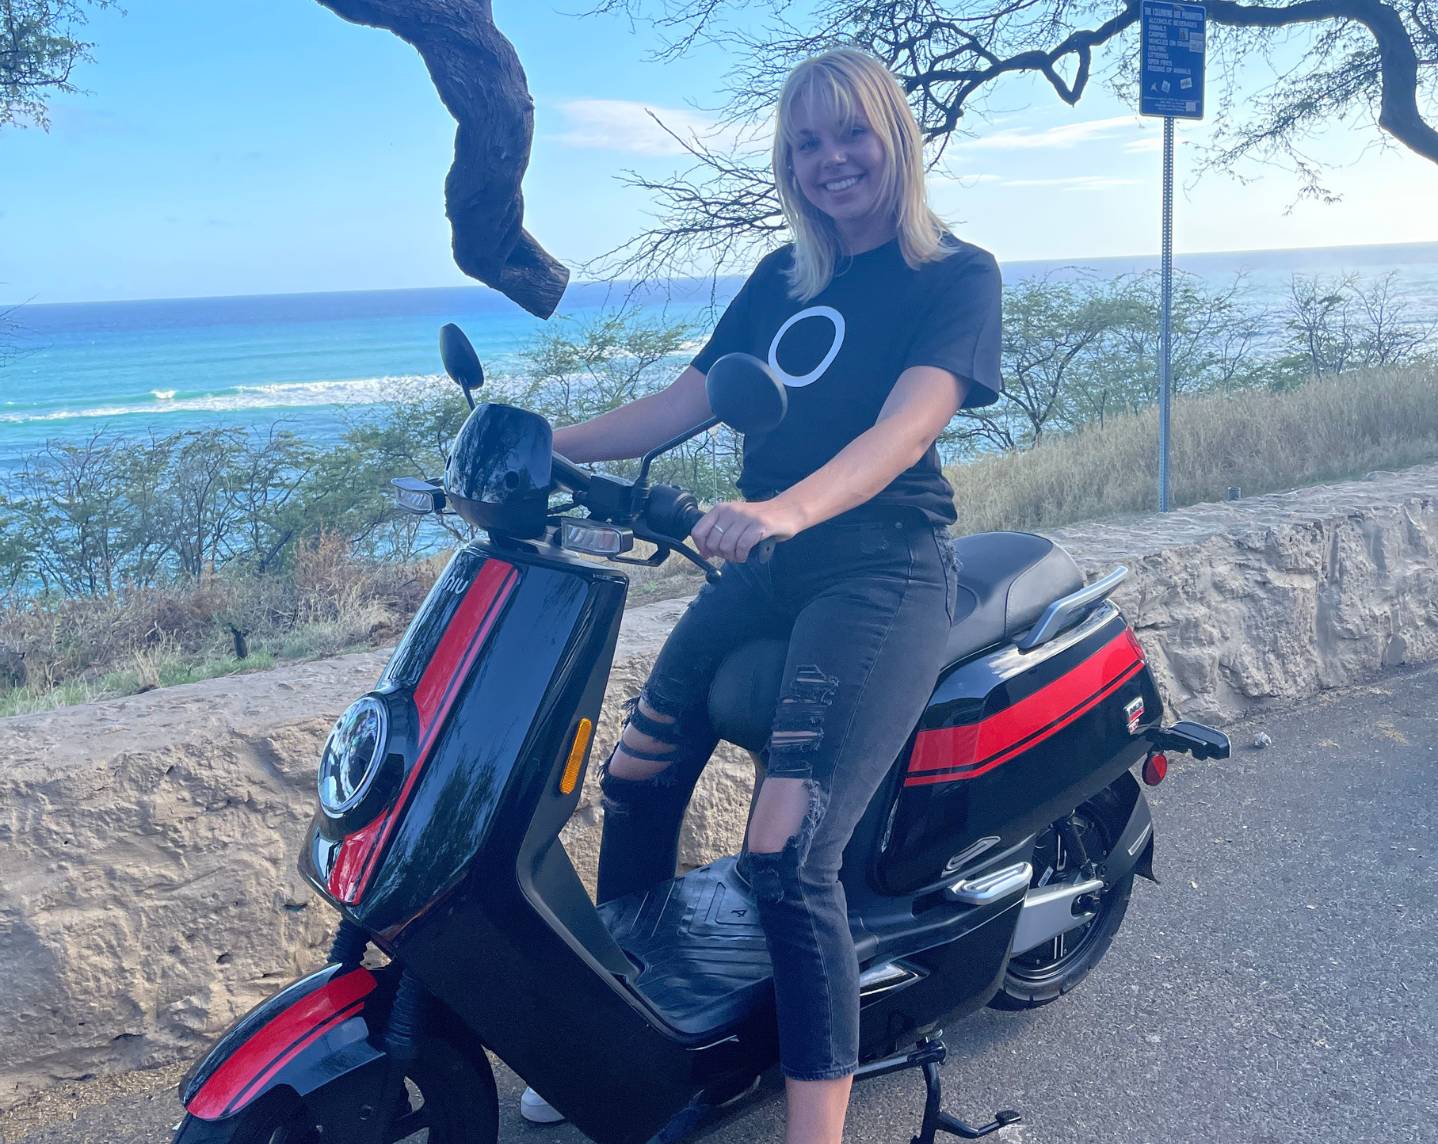 Rent an Electric Moped<BR>Go Green While Having Fun!